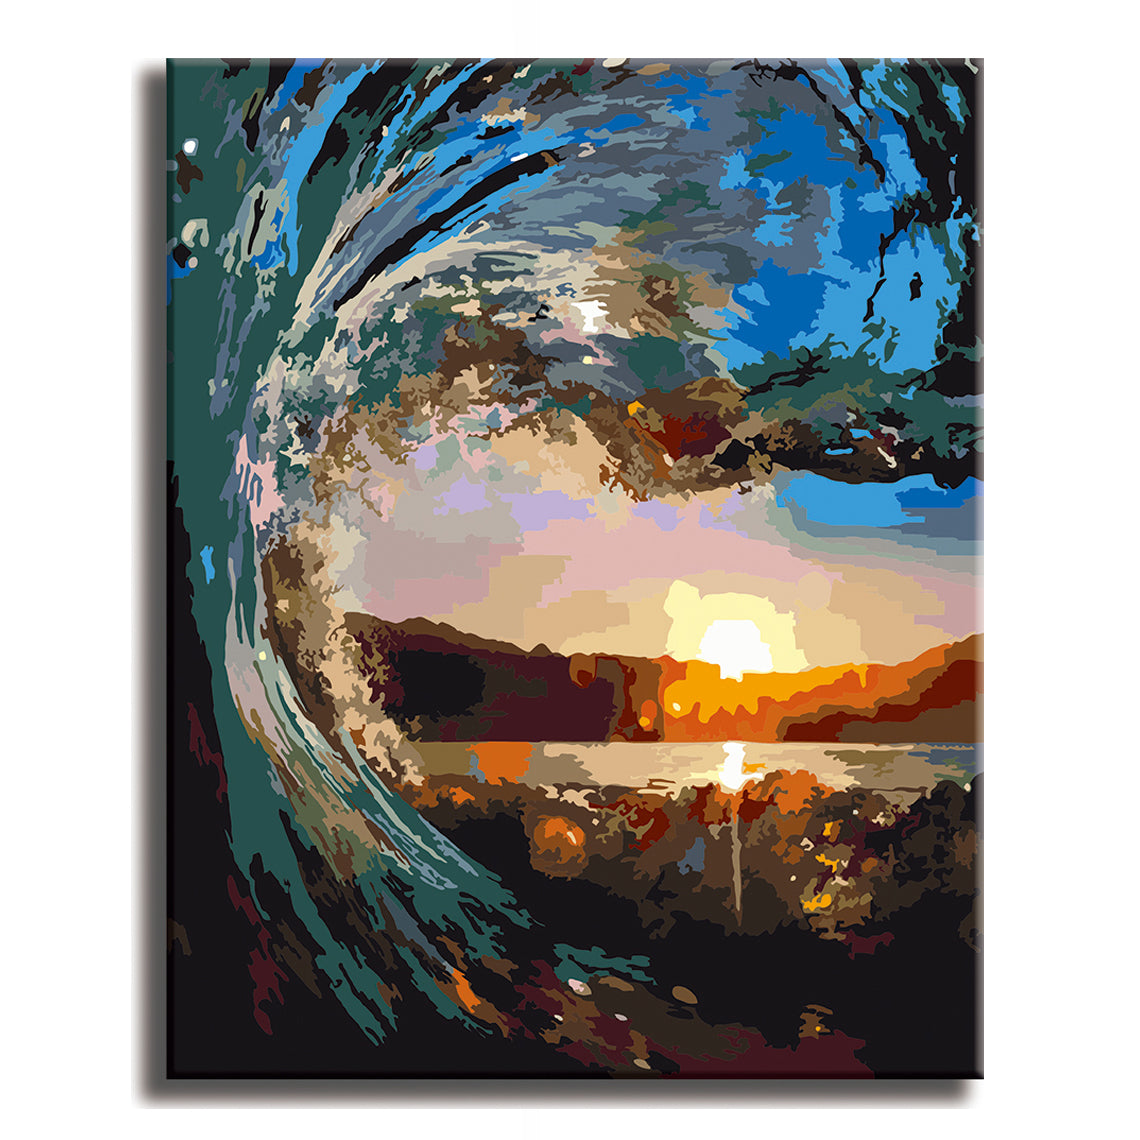 Sunrise Waves - Paint by Numbers Kit for Adults DIY Oil Painting